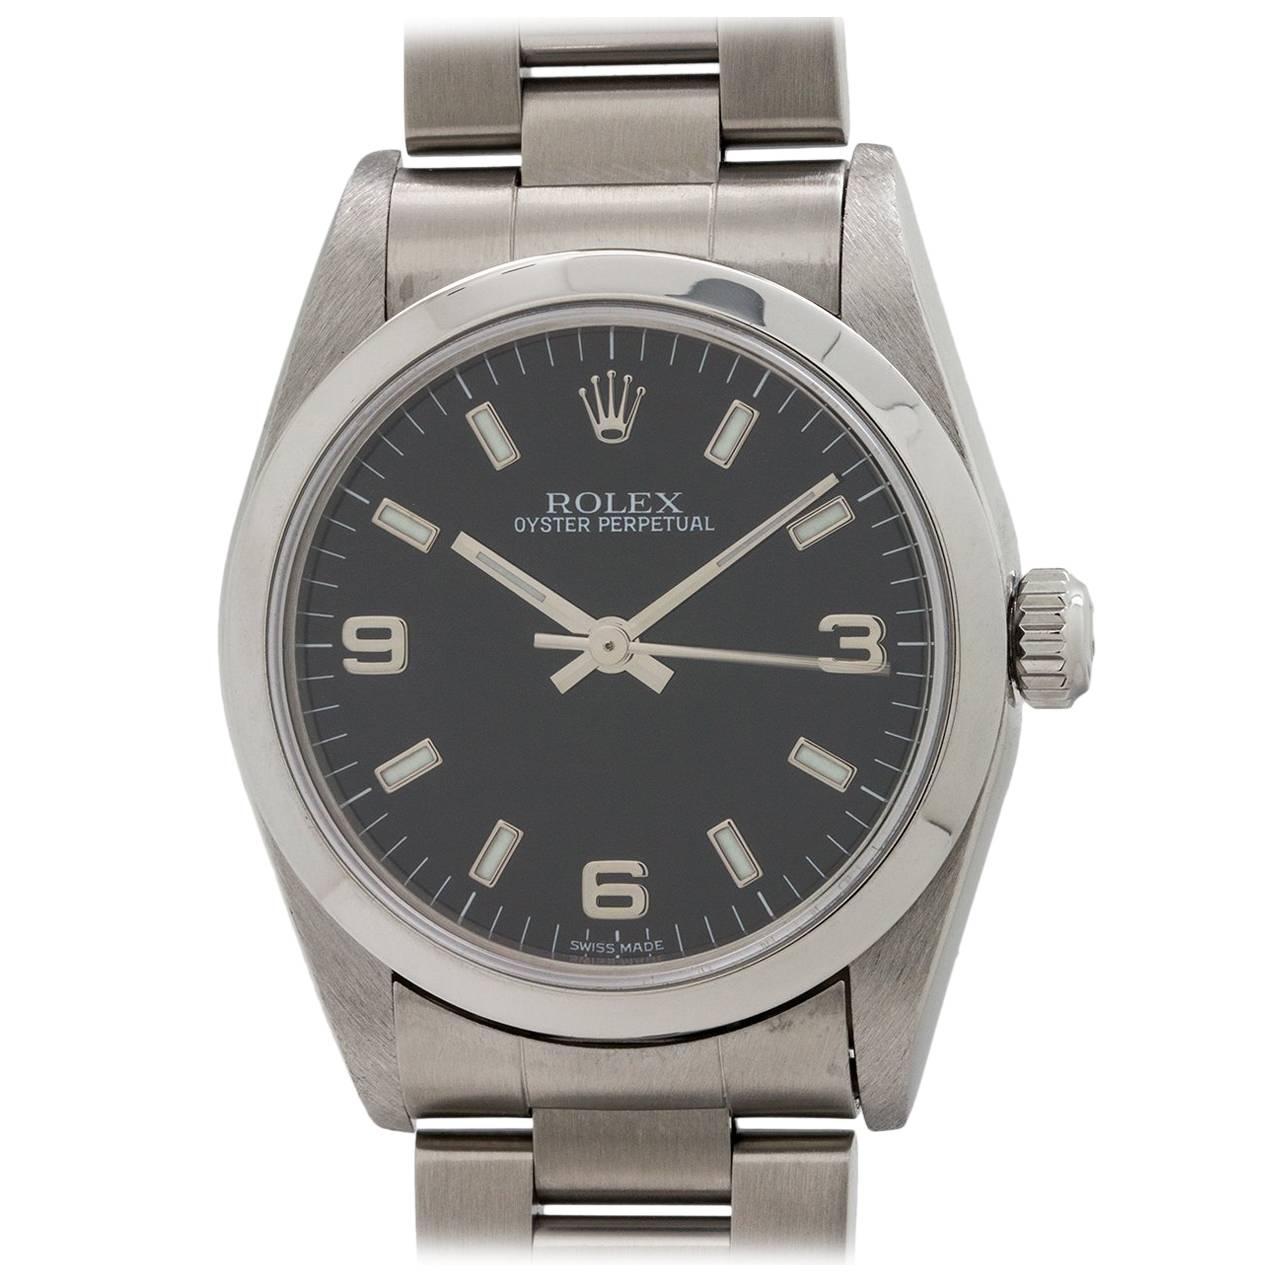 Rolex Stainless Steel Oyster Perpetual Midsize Wristwatch Ref 77080, circa 1998